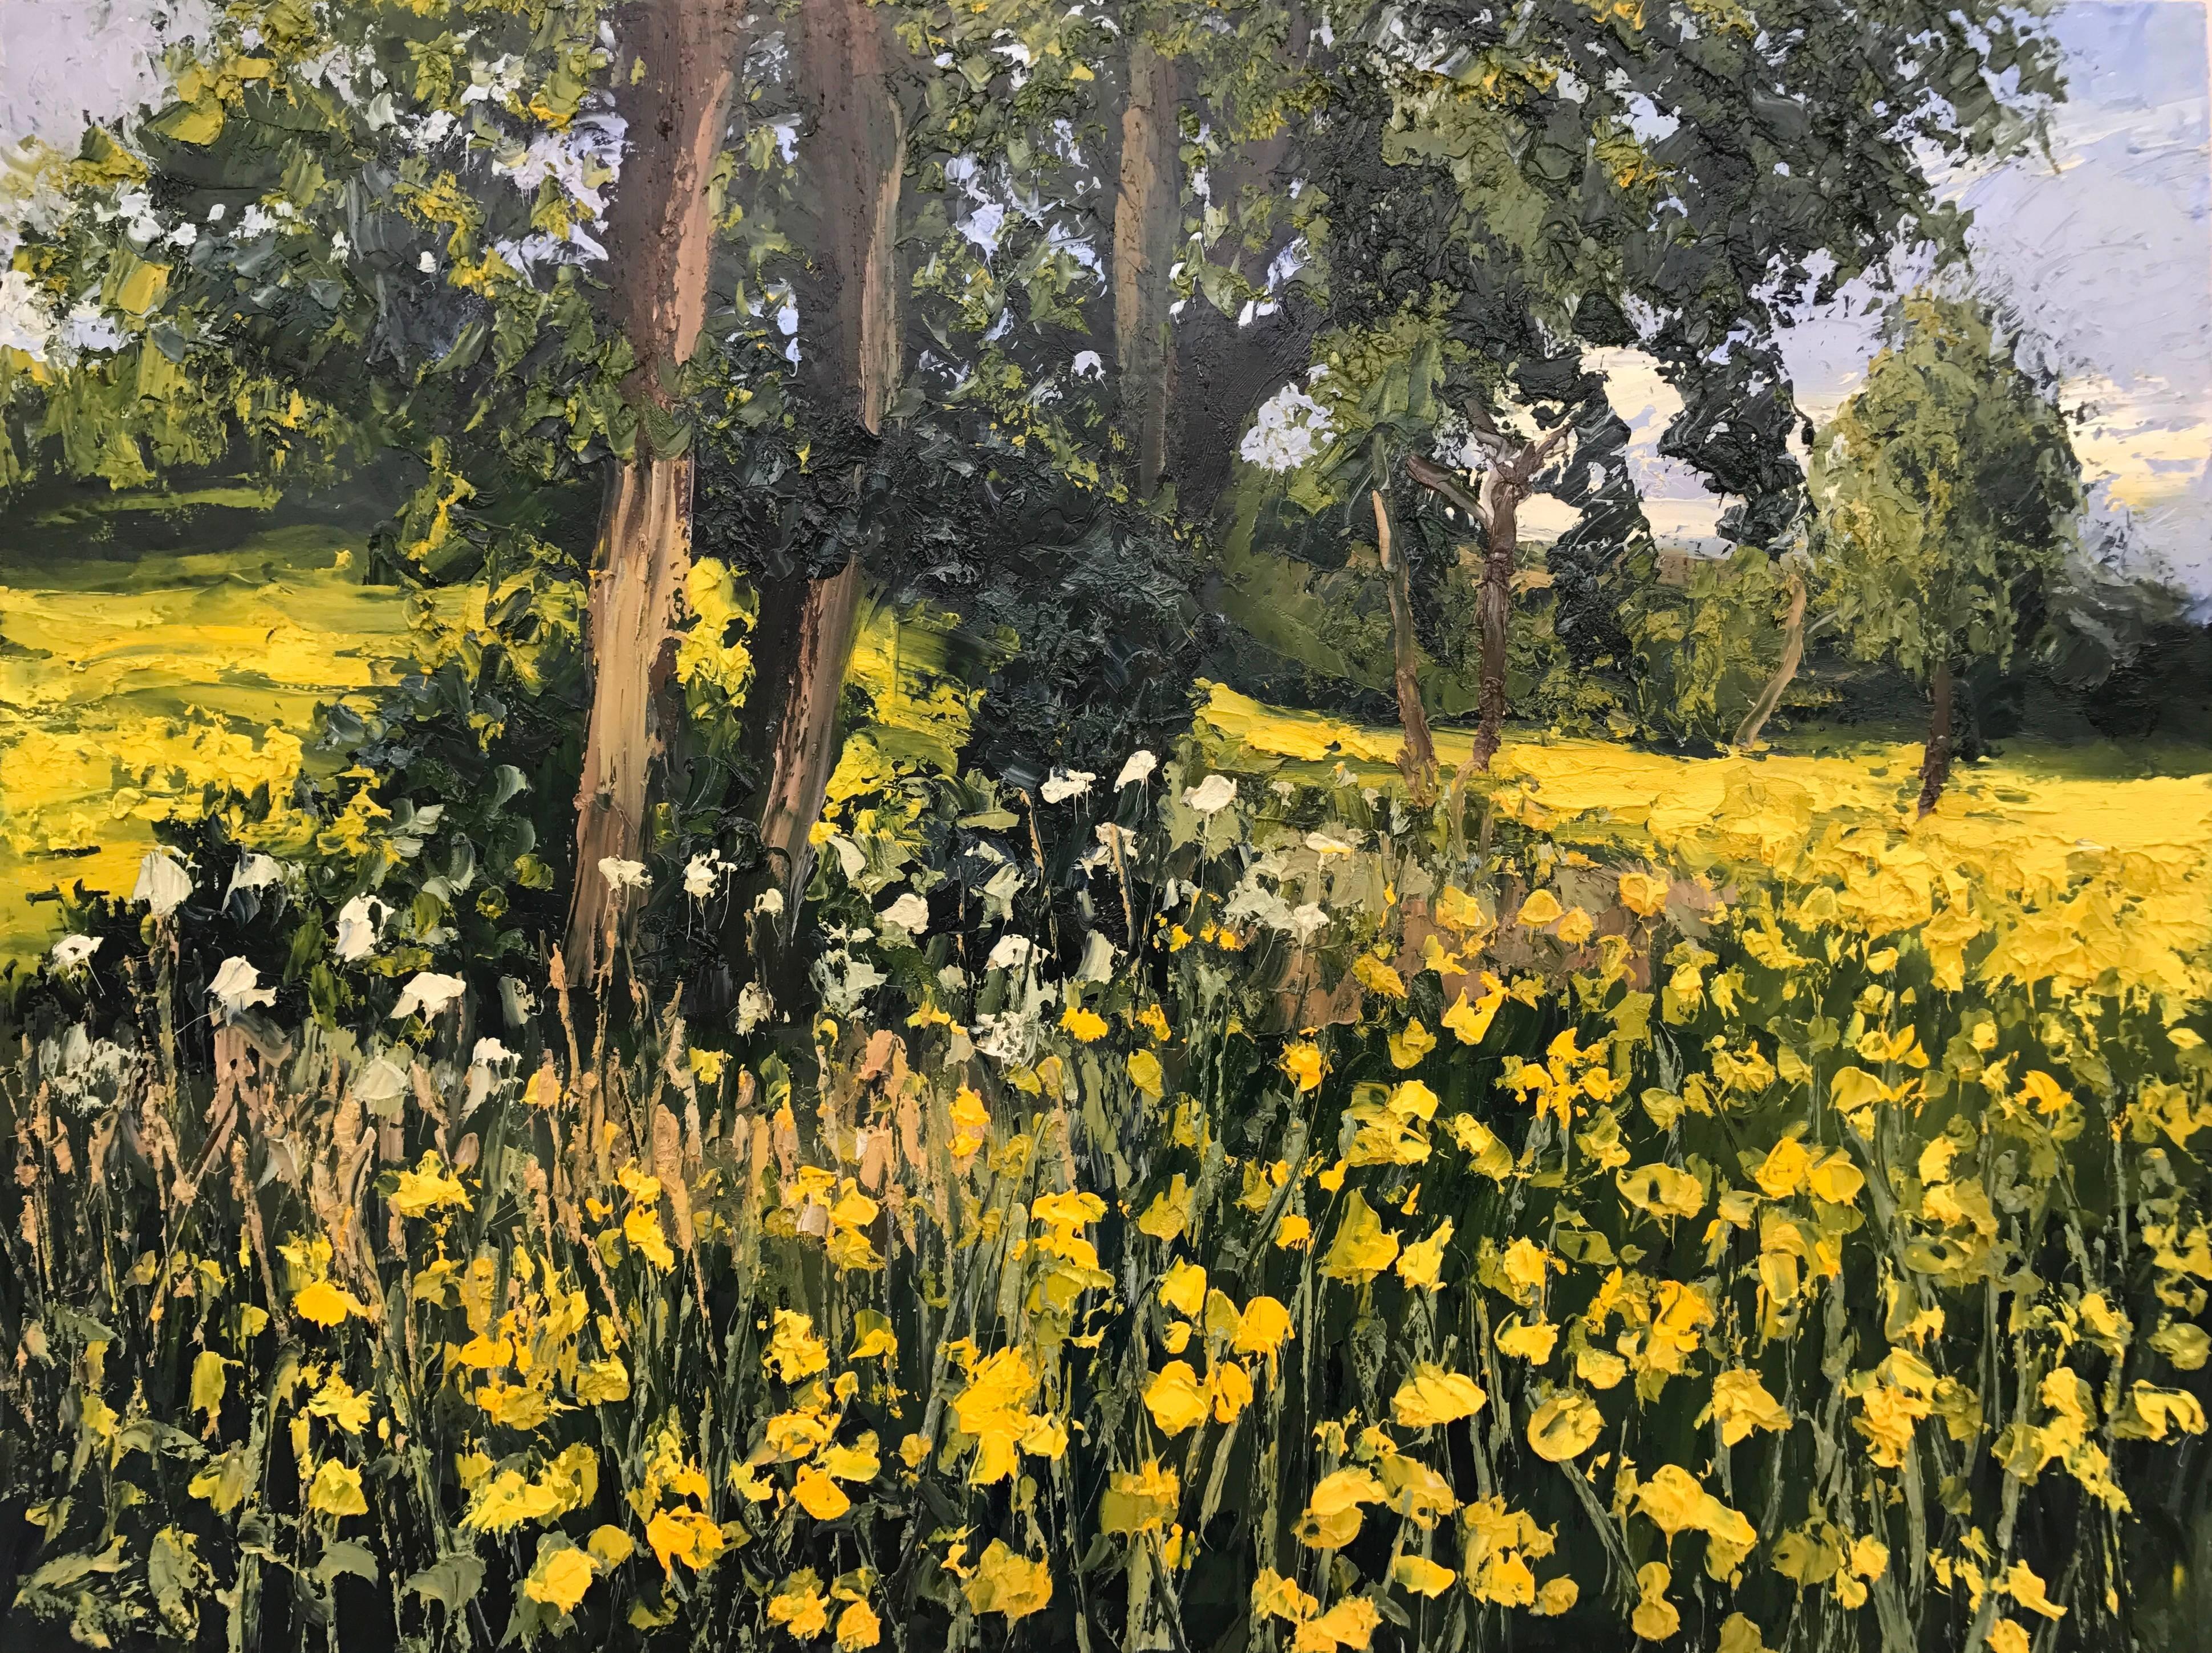 Rapeseed Field Impasto Landscape Oil Painting by British En Plein Air Artist - Brown Figurative Painting by Colin Halliday